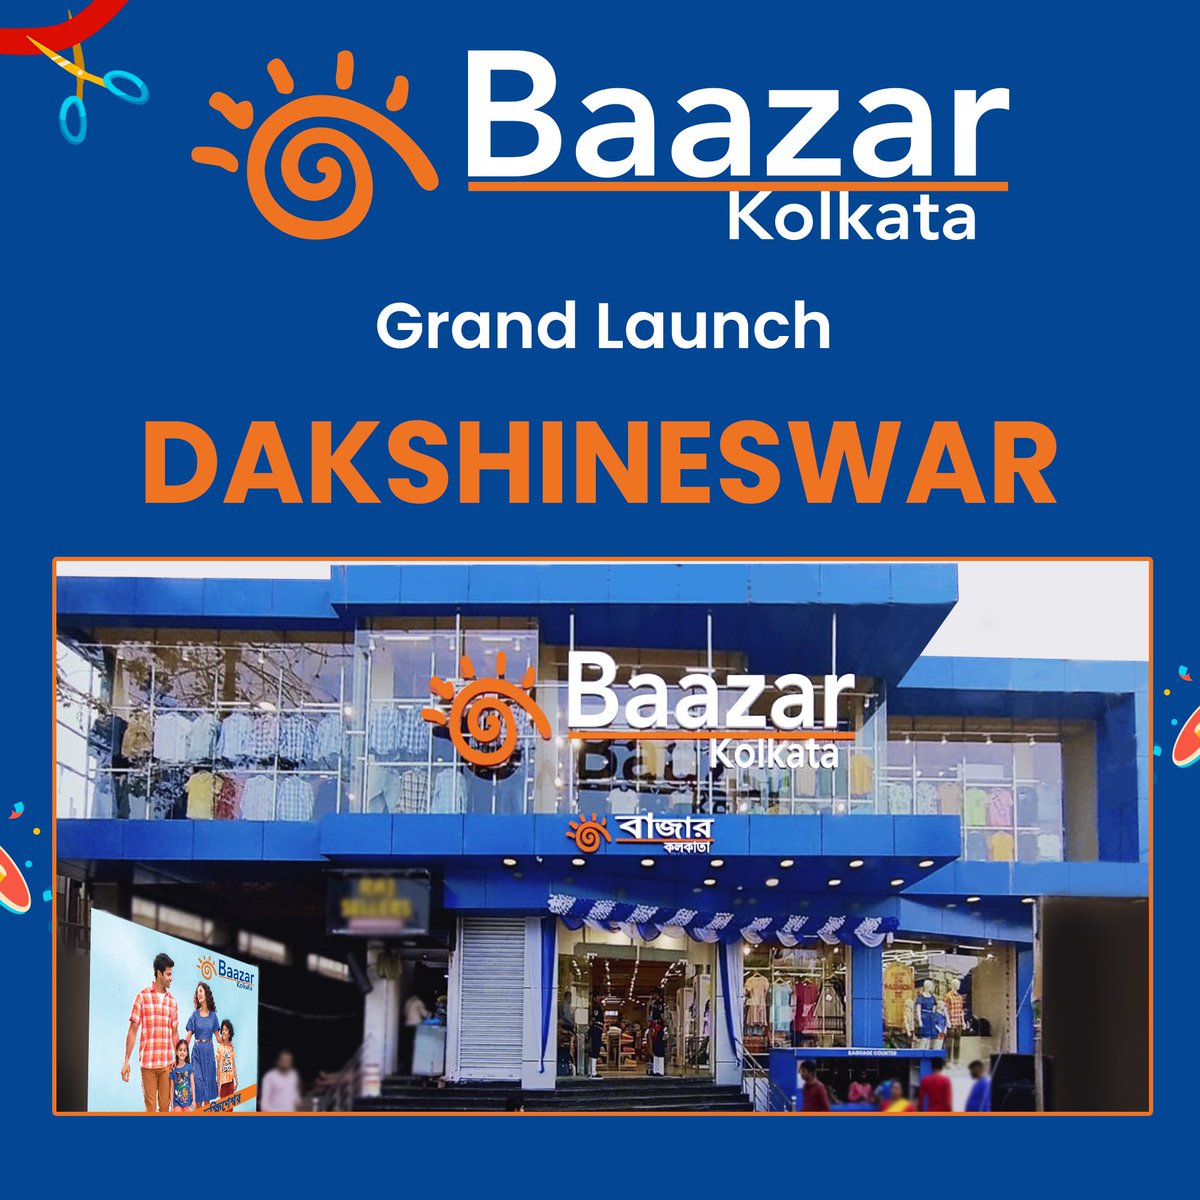 Baazar Kolkata is ecstatic to announce the launch of our store in Dakshineswar, Kolkata, and our 81st Store in West Bengal adding incredible depth to our network of 163 stores across Bharat. #BaazarKolkata #storeopening #newstore #newstoreopening #newstorealert #newstorelaunch